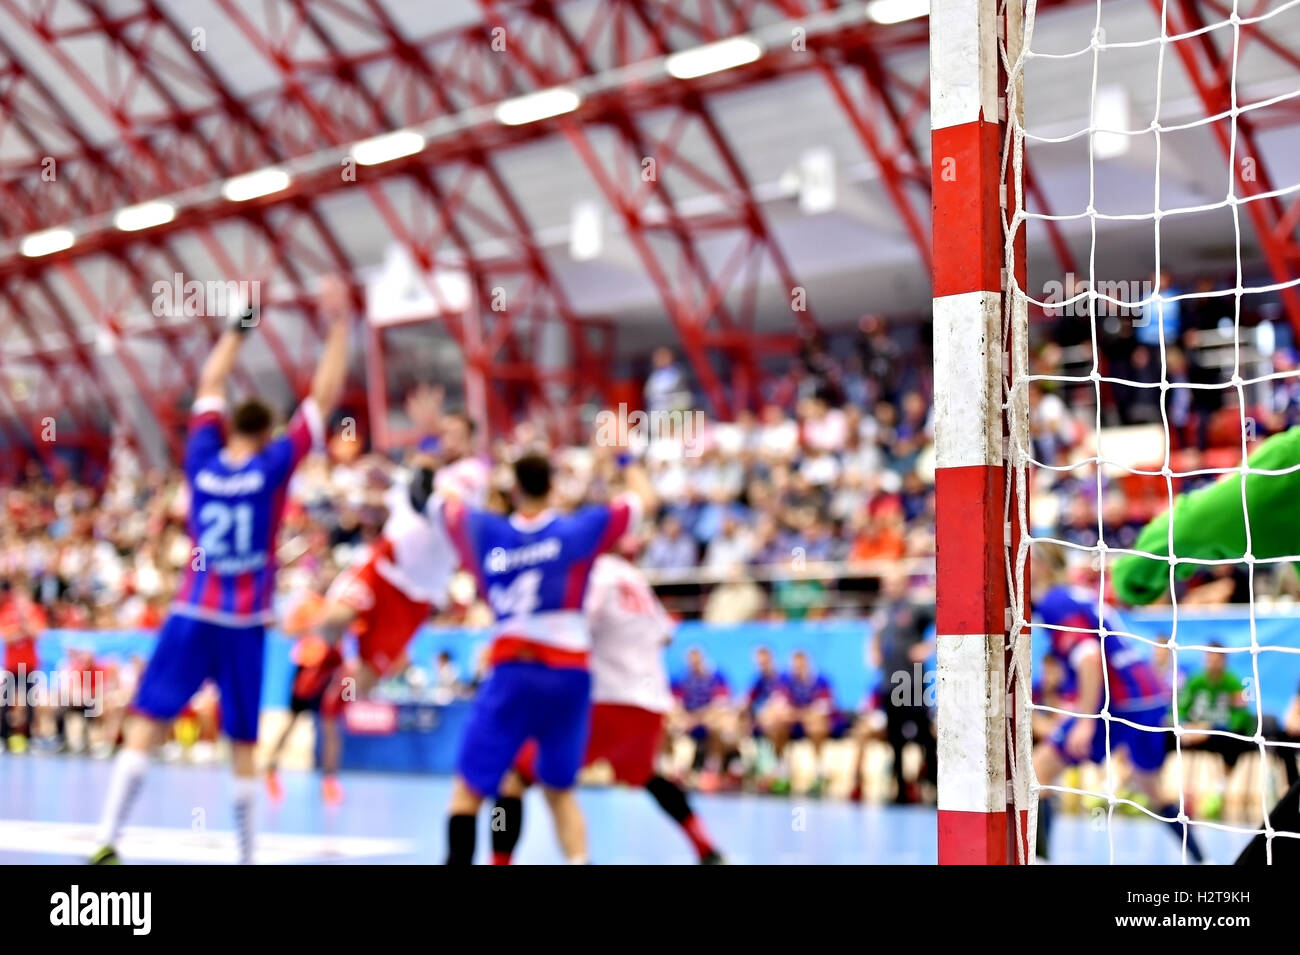 Handball match scene with goalpost and players in the background Stock Photo